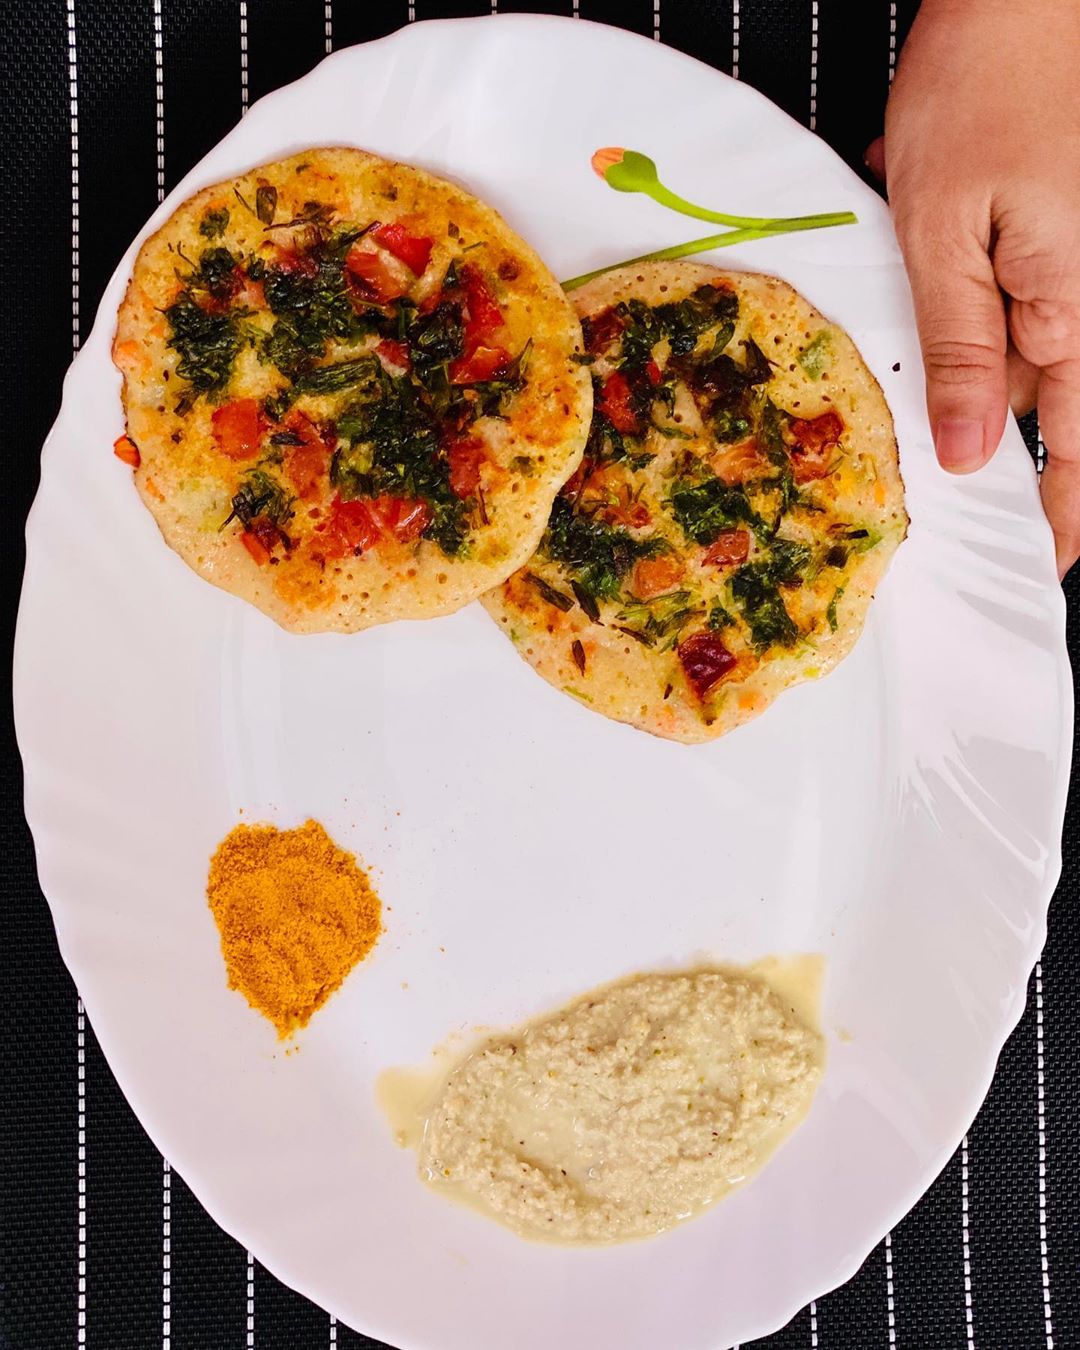 At times, Uttapam could be quite bland. So all I could think of, to add some nutritional value and taste for my taste buds was adding chunks of my favorite vegetables and some greens... ( from my kitchen garden )  and side it up with 